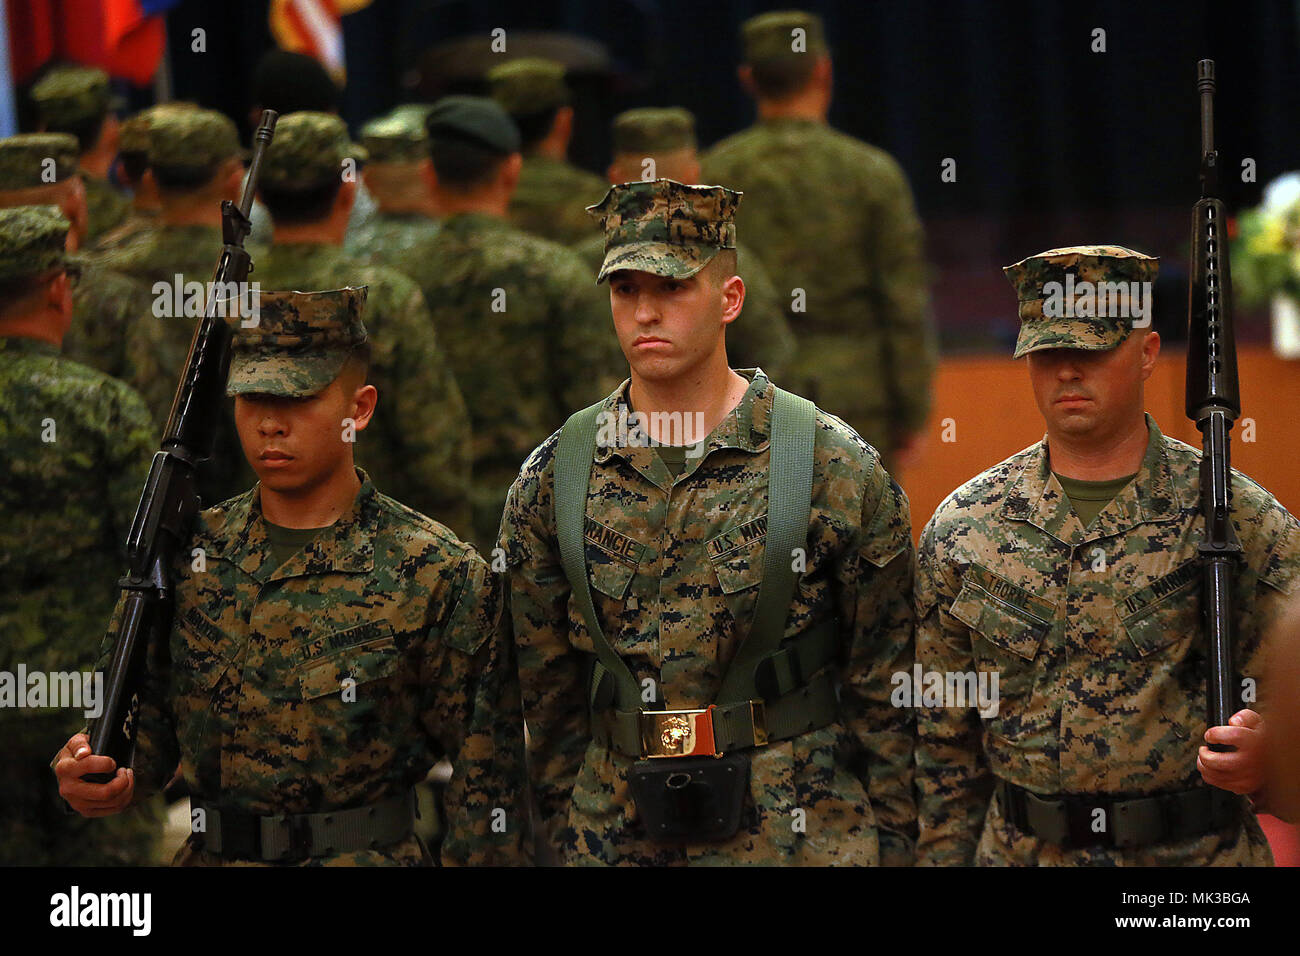 Quezon City, Philippines. 7th May, 2018. U.S. soldiers march during the opening ceremony of the 'Balikatan 2018' in Quezon City, the Philippines, May 7, 2018. Troops from the Philippines and the United States kicked off on Monday a series of joint military exercises designed to hone their interoperability skills in fighting terrorism and humanitarian assistance. Philippine Defense Secretary Delfin Lorenzana said the 12-day 'Balikatan 2018' will focus on interoperability training to address traditional and non-traditional security concerns. Credit: Rouelle Umali/Xinhua/Alamy Live News Stock Photo